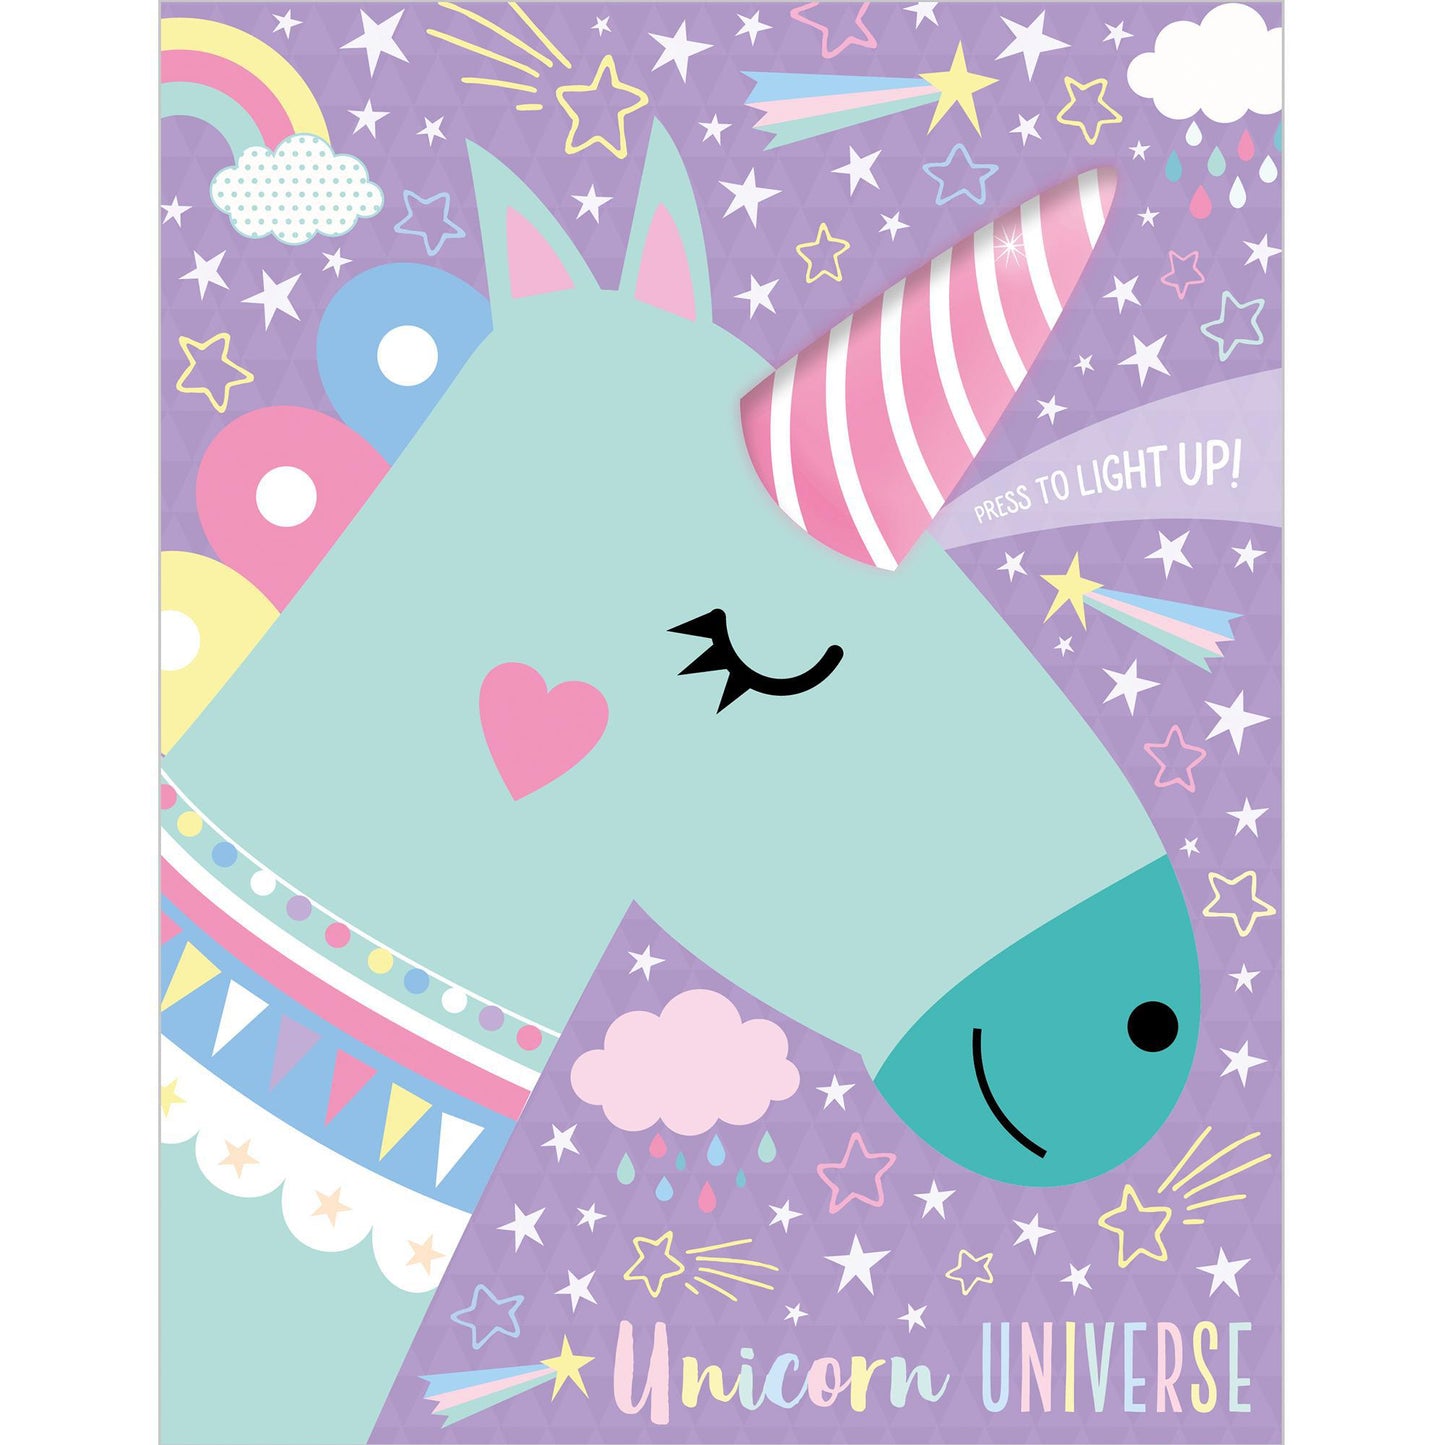 Unicorn Universe Journal  Fun Book Features A Gorgeous Unicorn With a Light-Up Horn